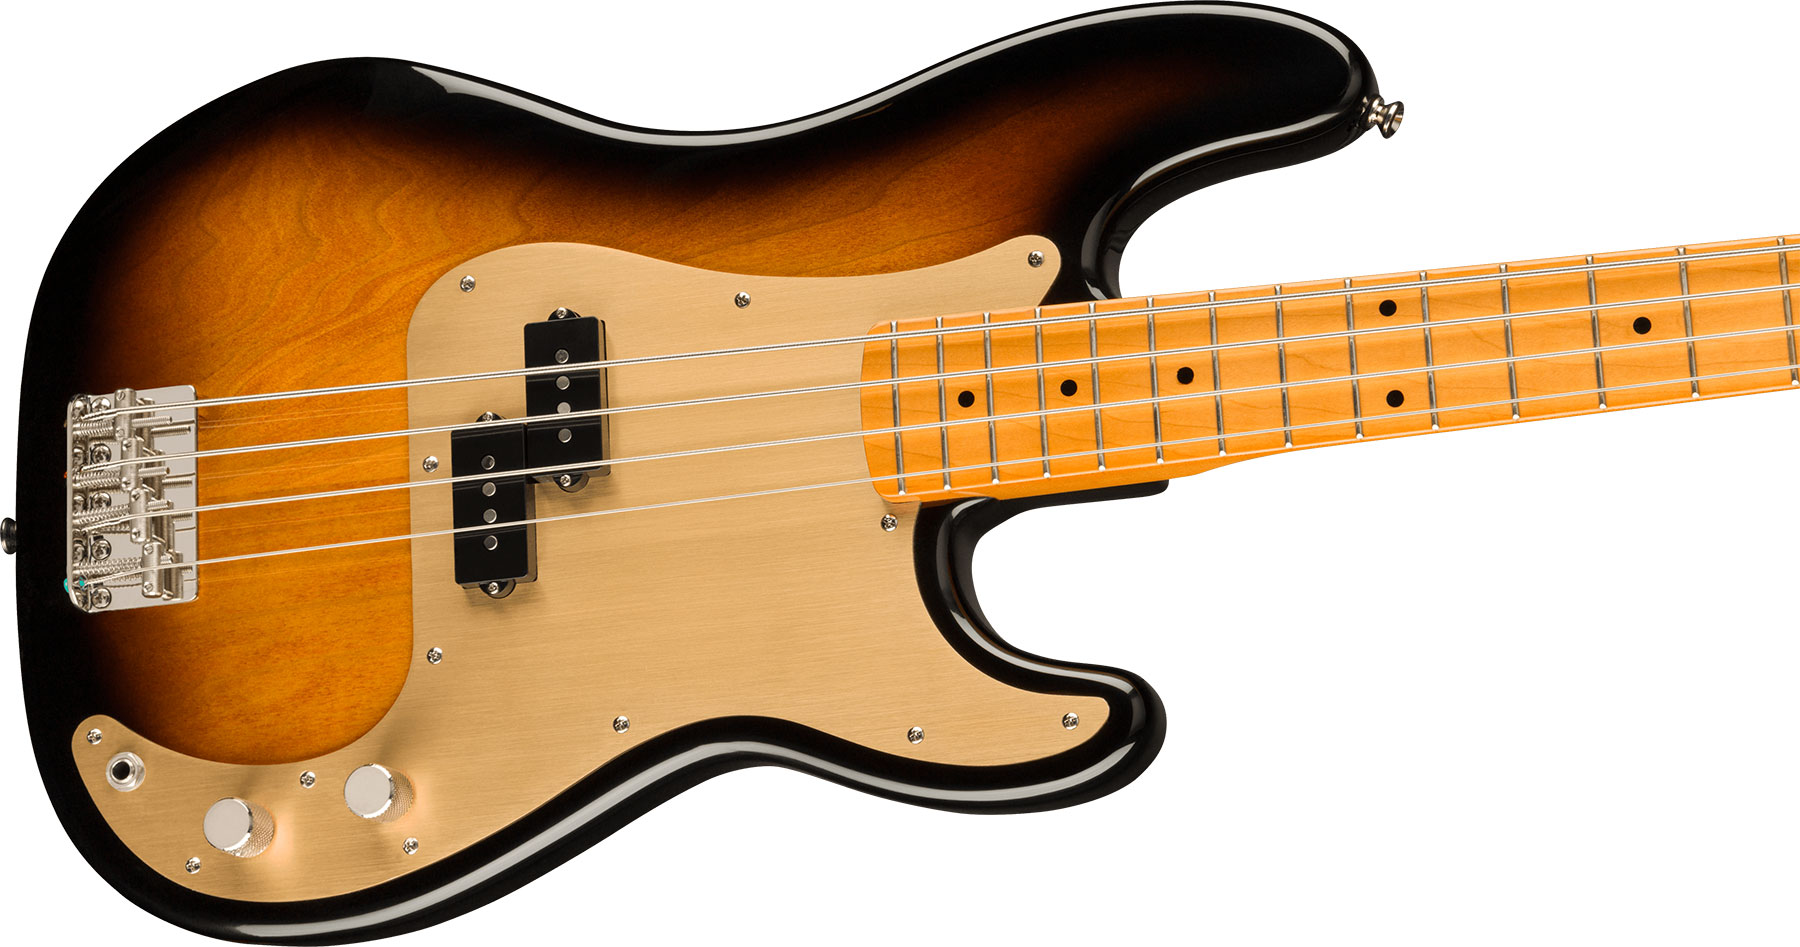 Squier Precision Bass Late '50s Classic Vibe Fsr Ltd Mn - 2-color Sunburst - Solid body electric bass - Variation 2